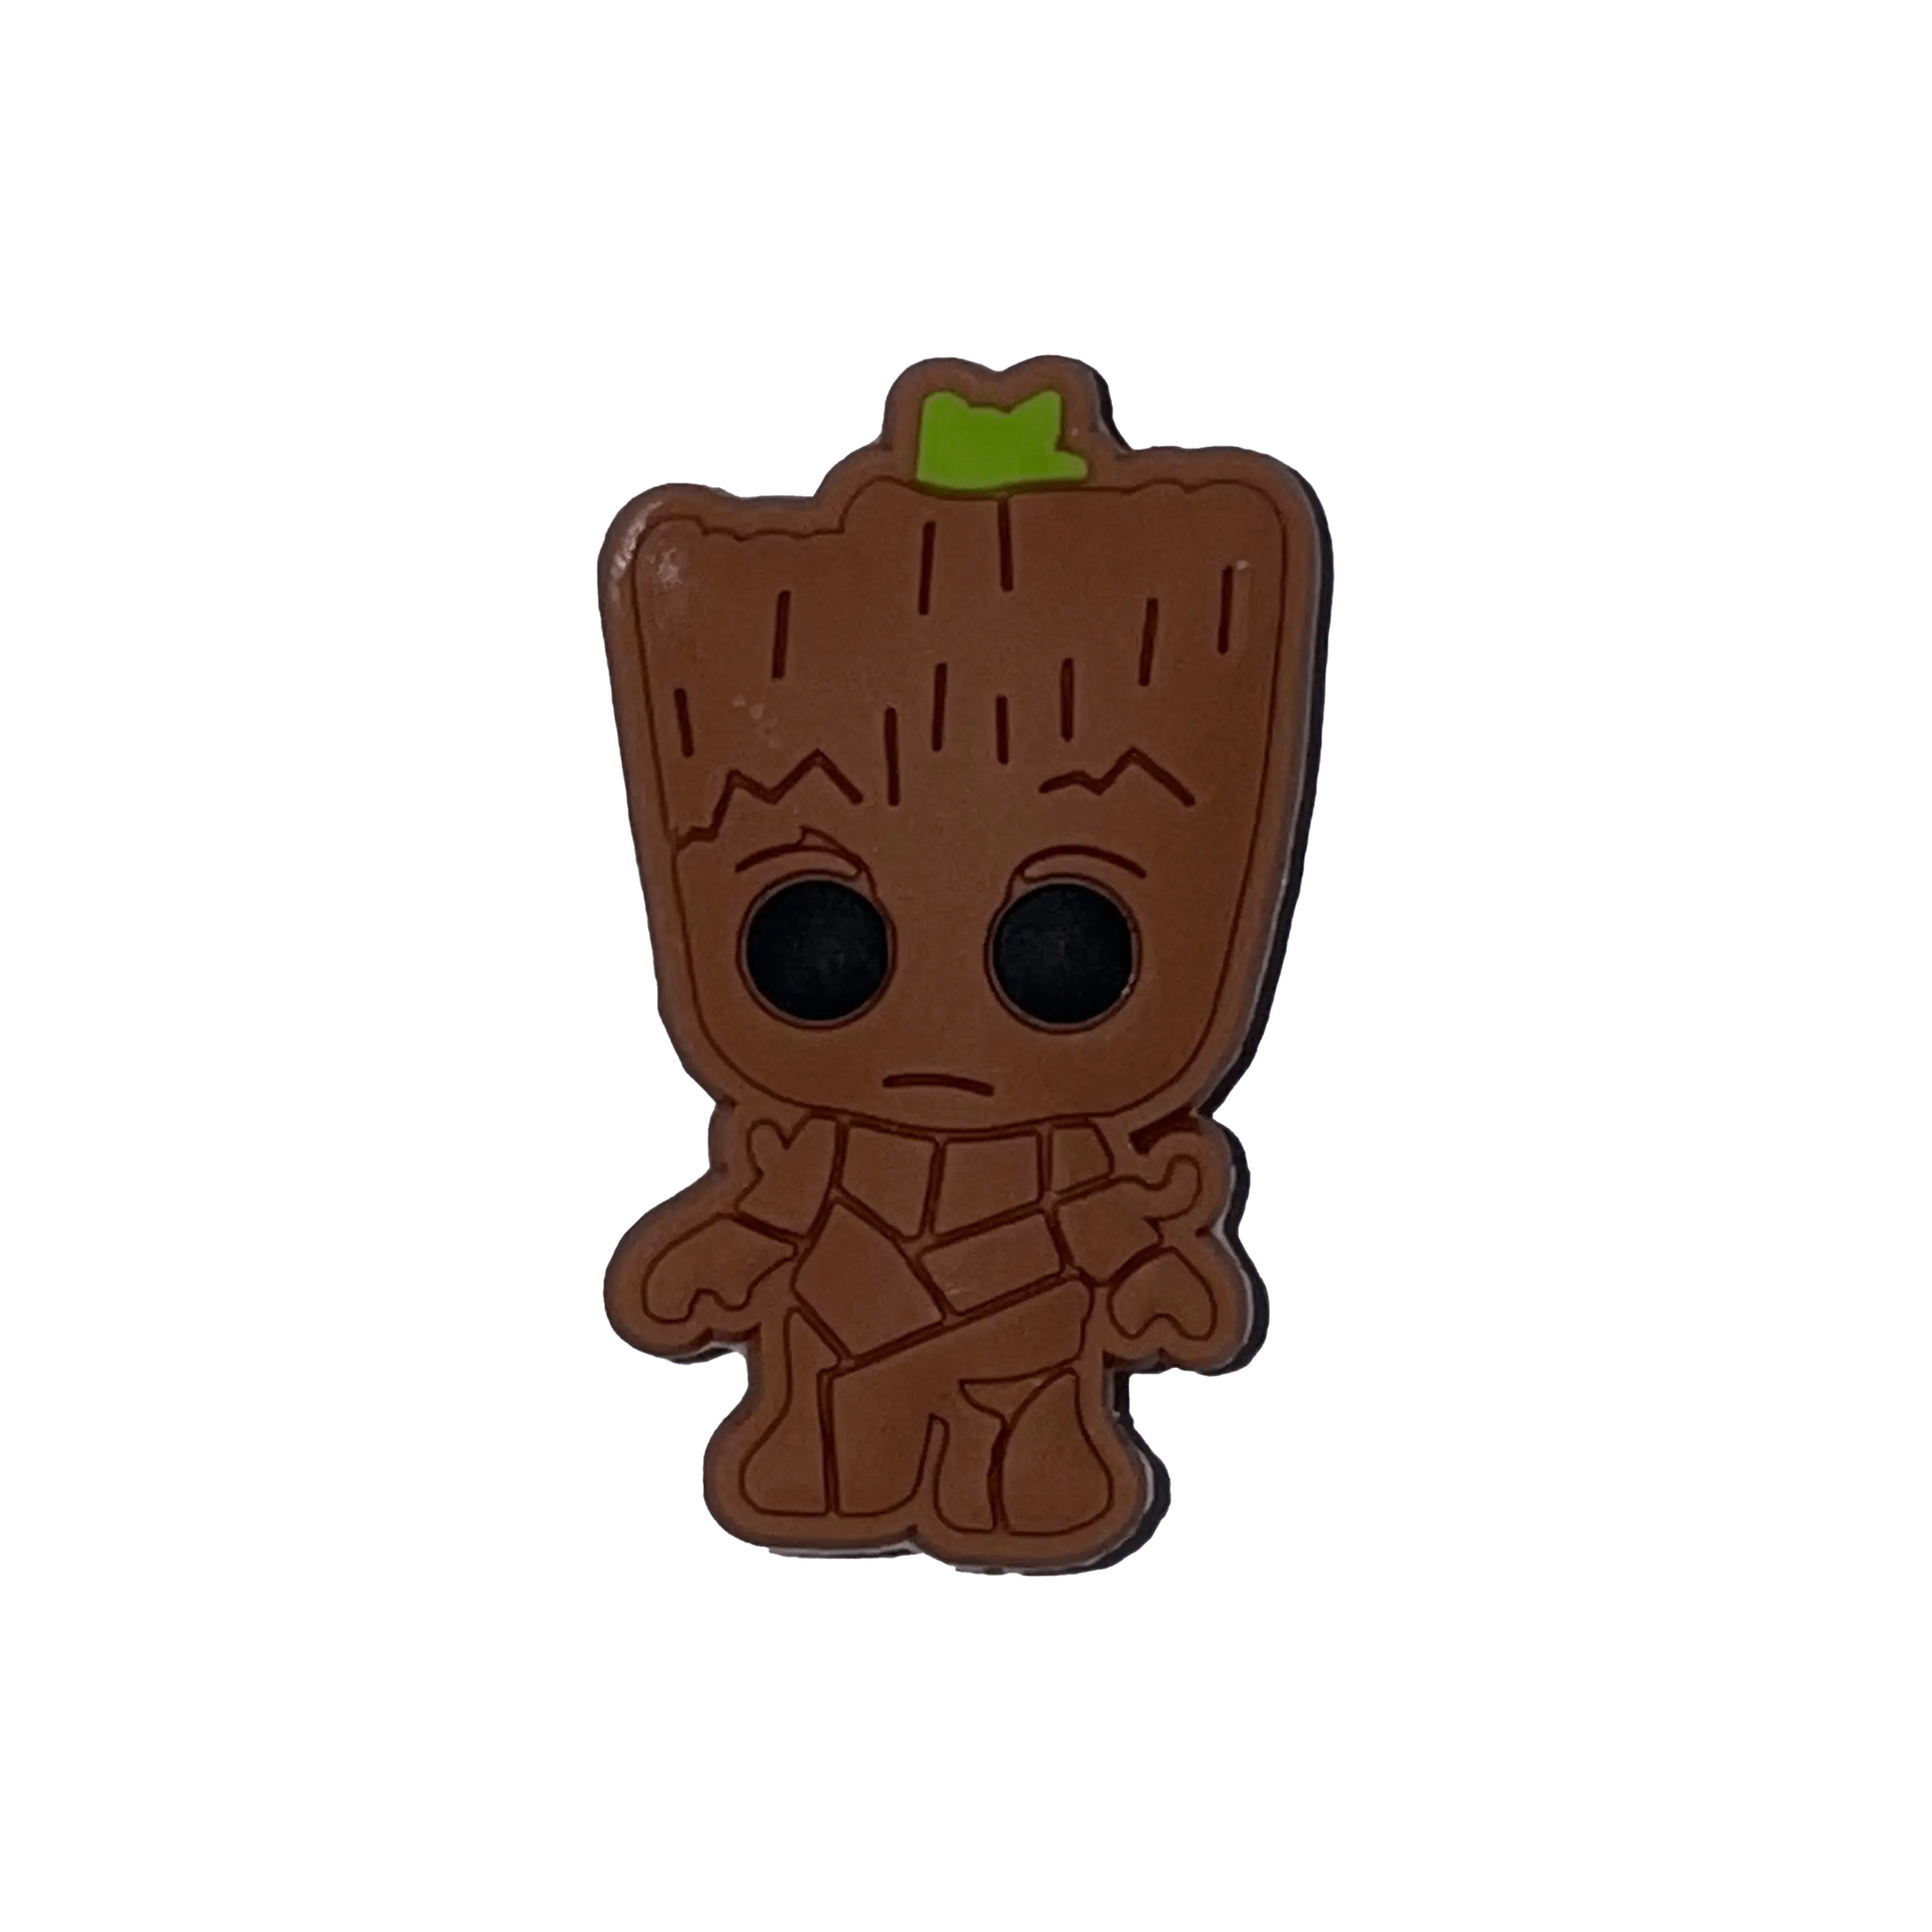 Guardians of the Galaxy Collection Charms By Prince